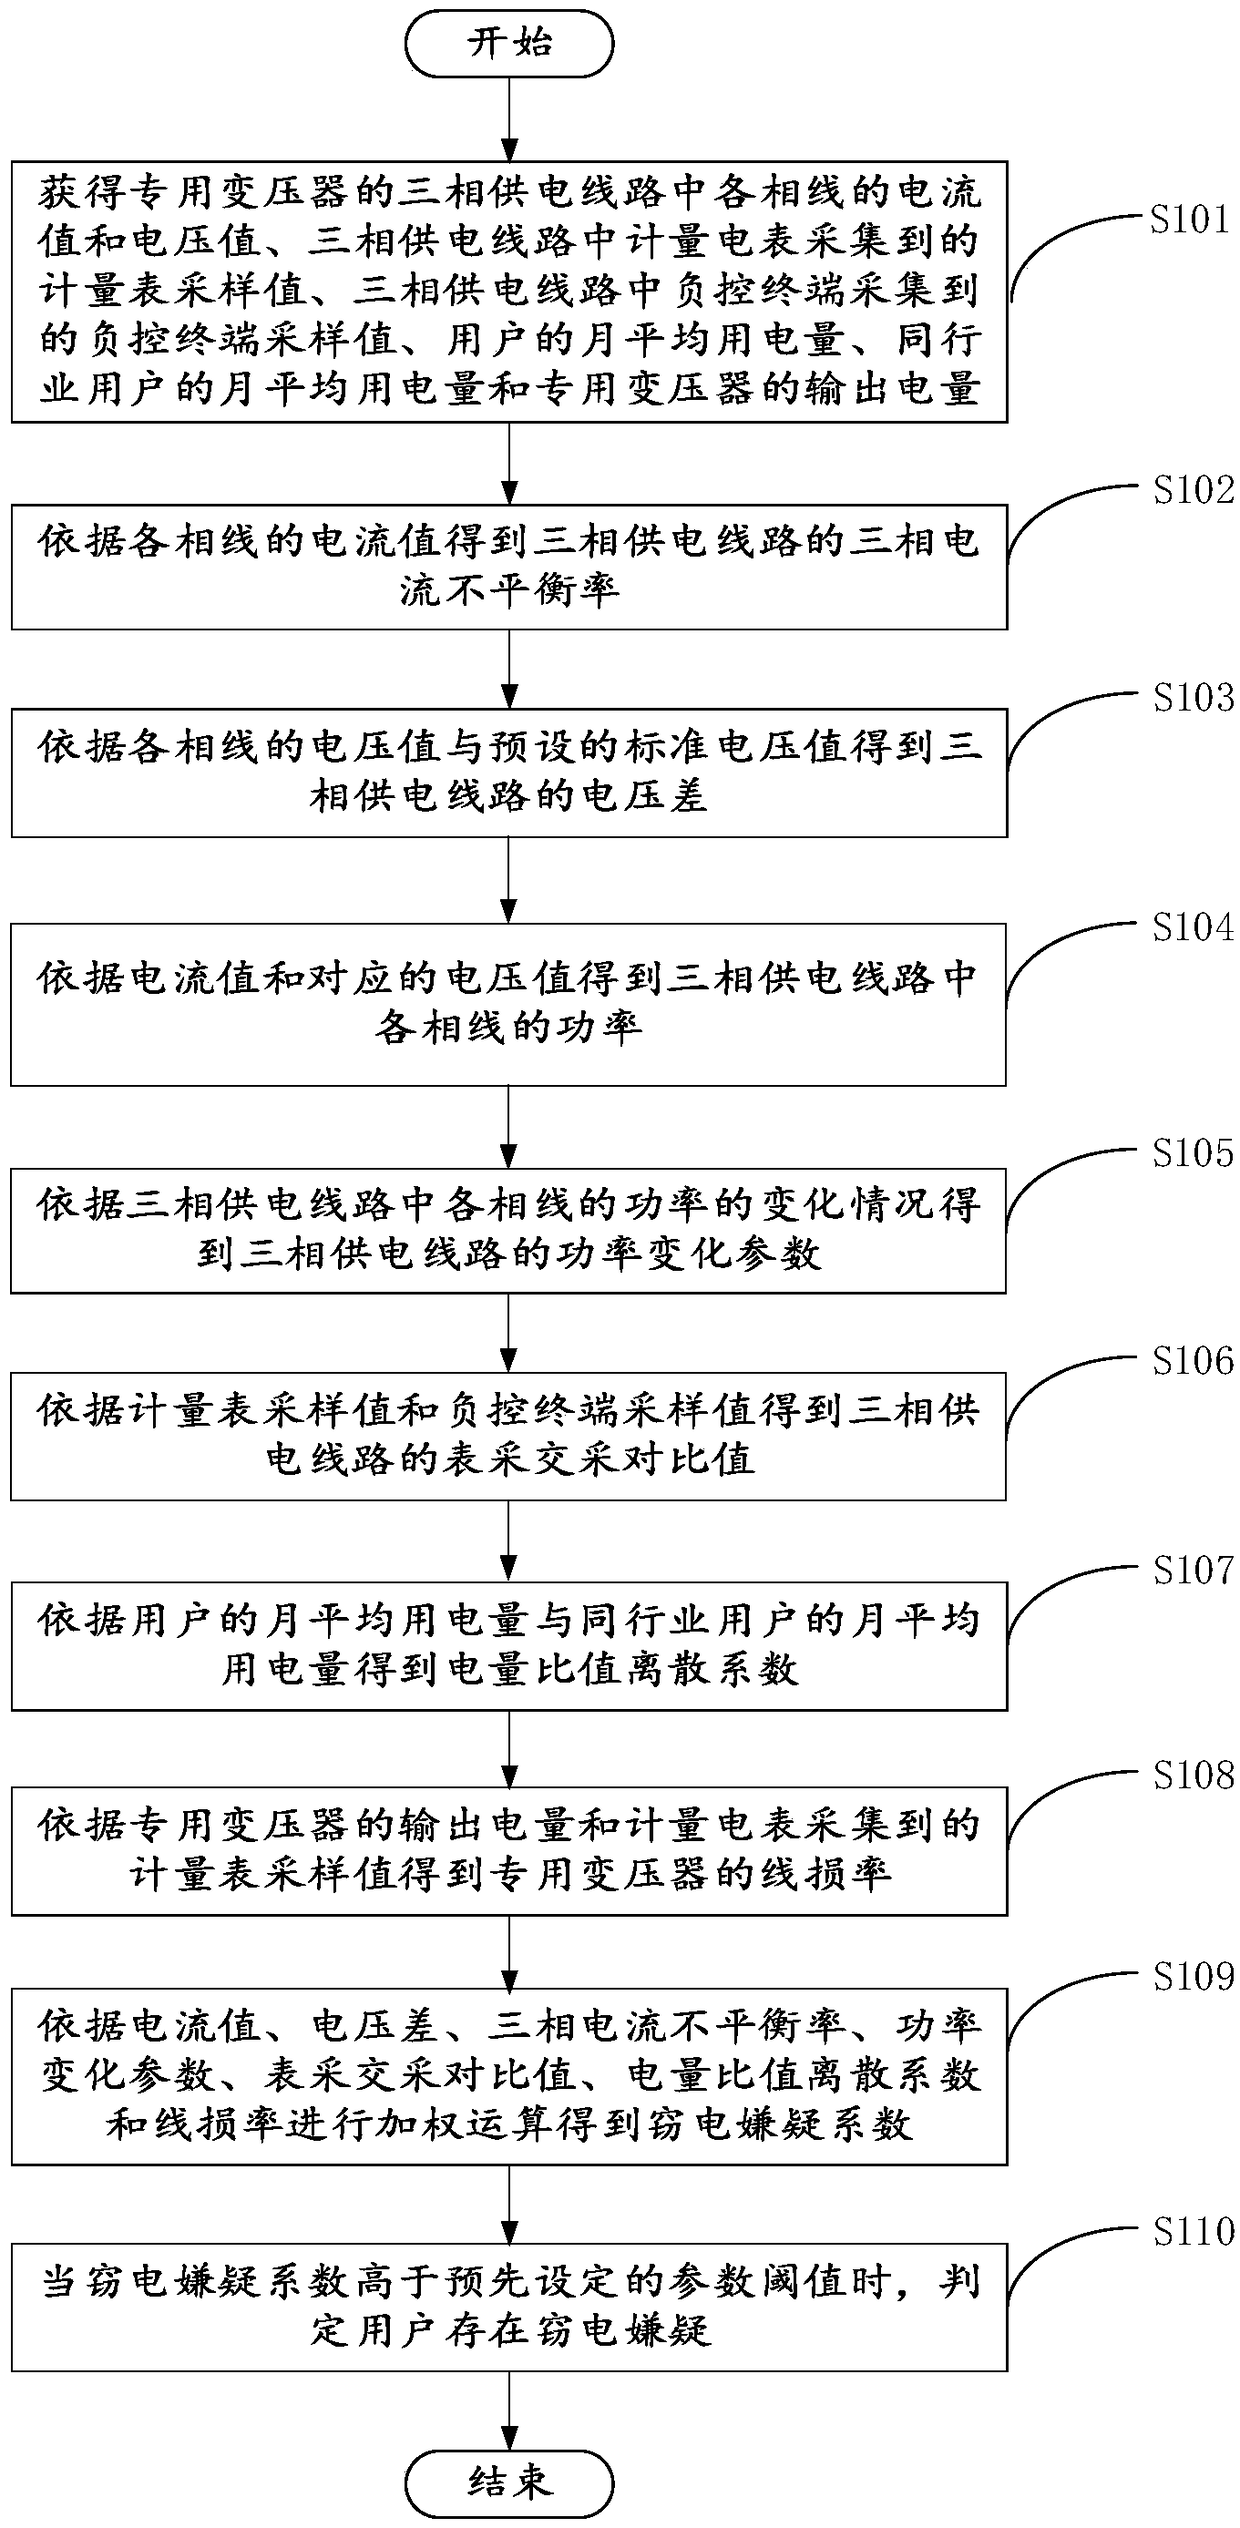 Electricity stealing analysis method, device and server